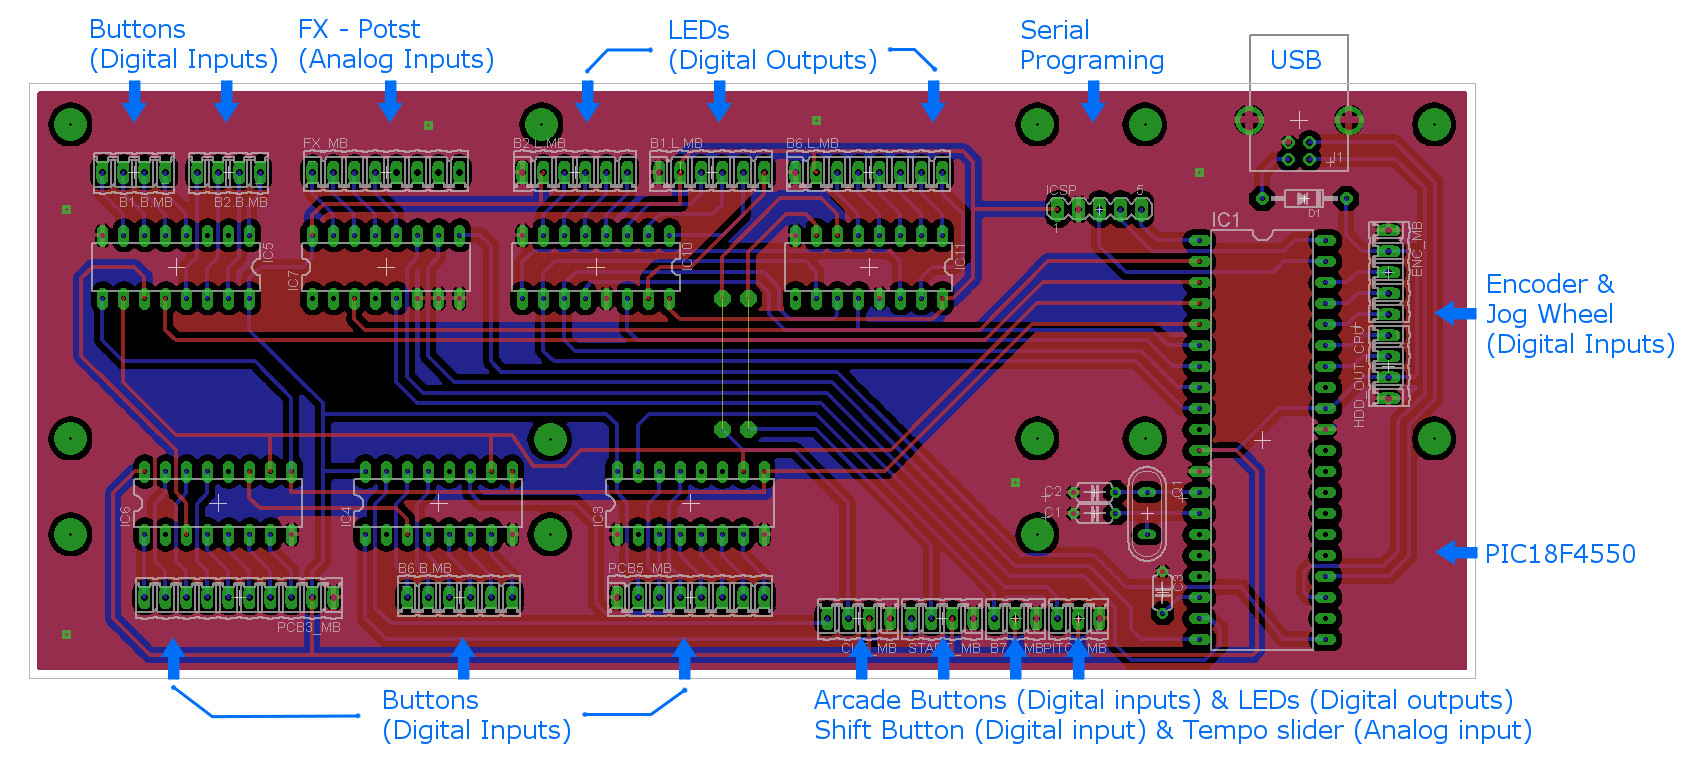 DIY MIDI DJ Deck controller - Main board PCB view with description of particular input / output connectors